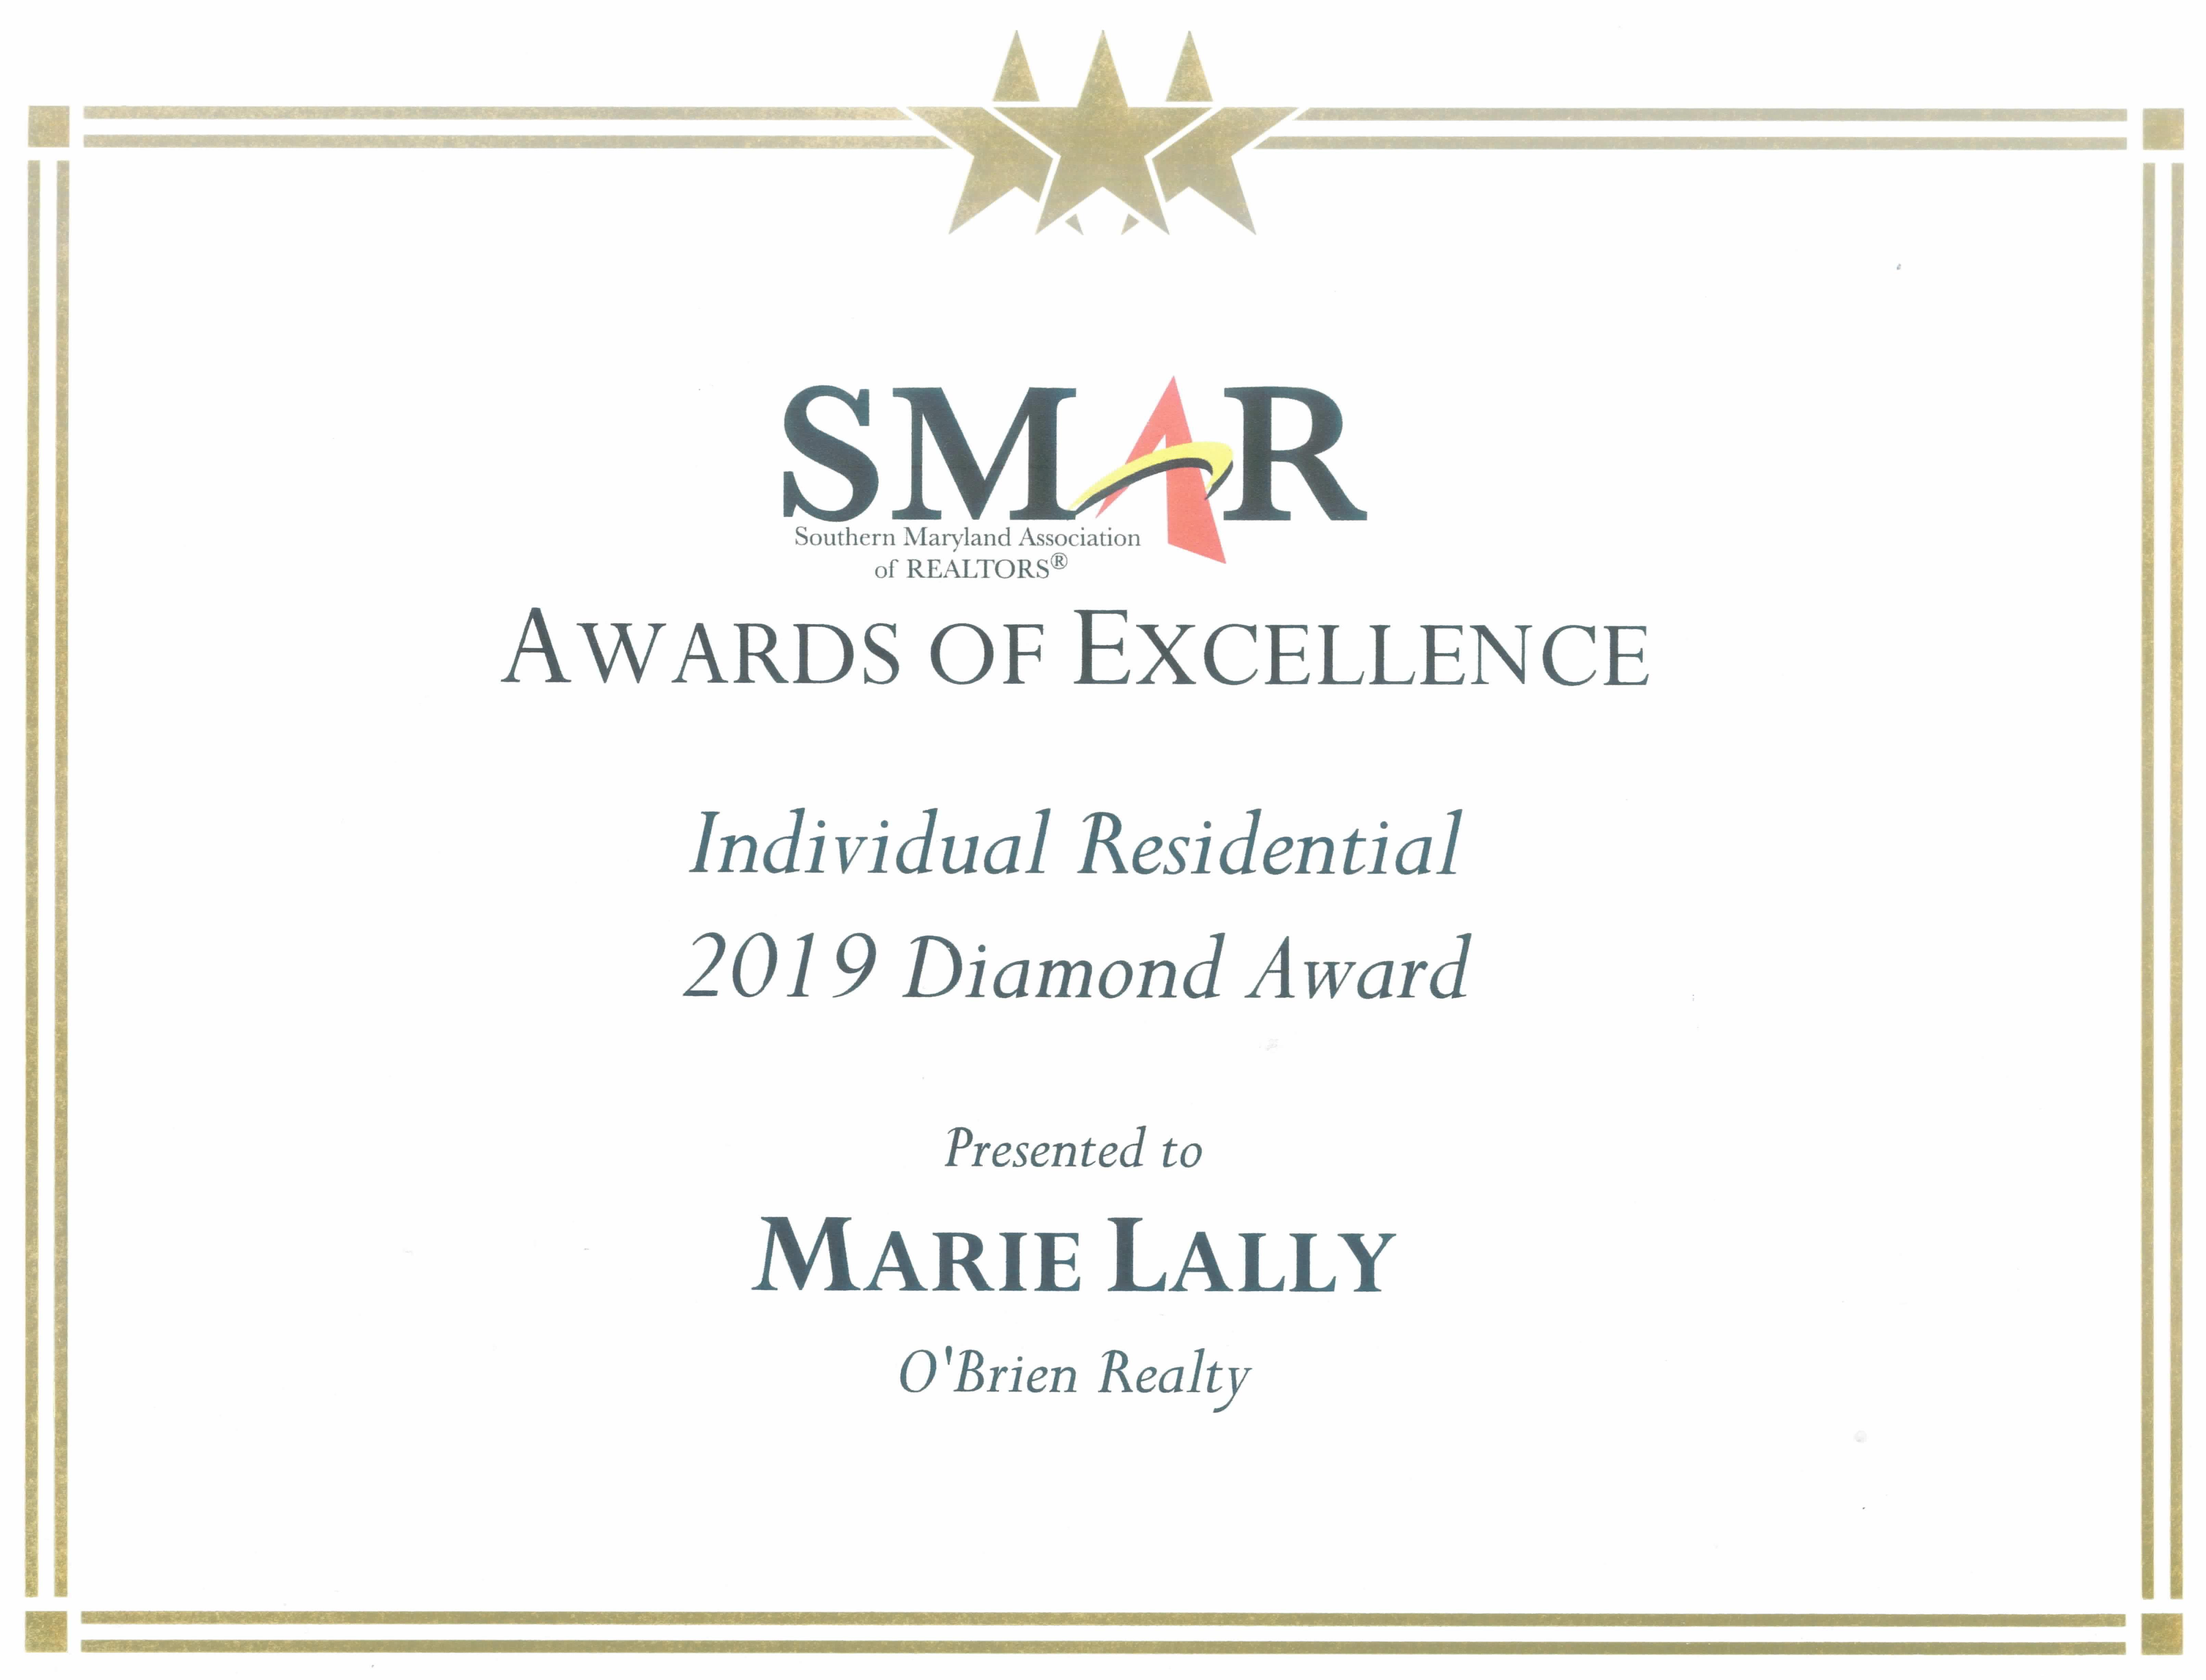 Marie Lally is a top producing agent in Southern MD.  Marie Serves Buyer and Sellers of residential real estate in Saint Mary's County, Calvert County, Charles County and other areas!  Marie is a Diamond Award Winning Realtor - The Best of Southern Maryland!